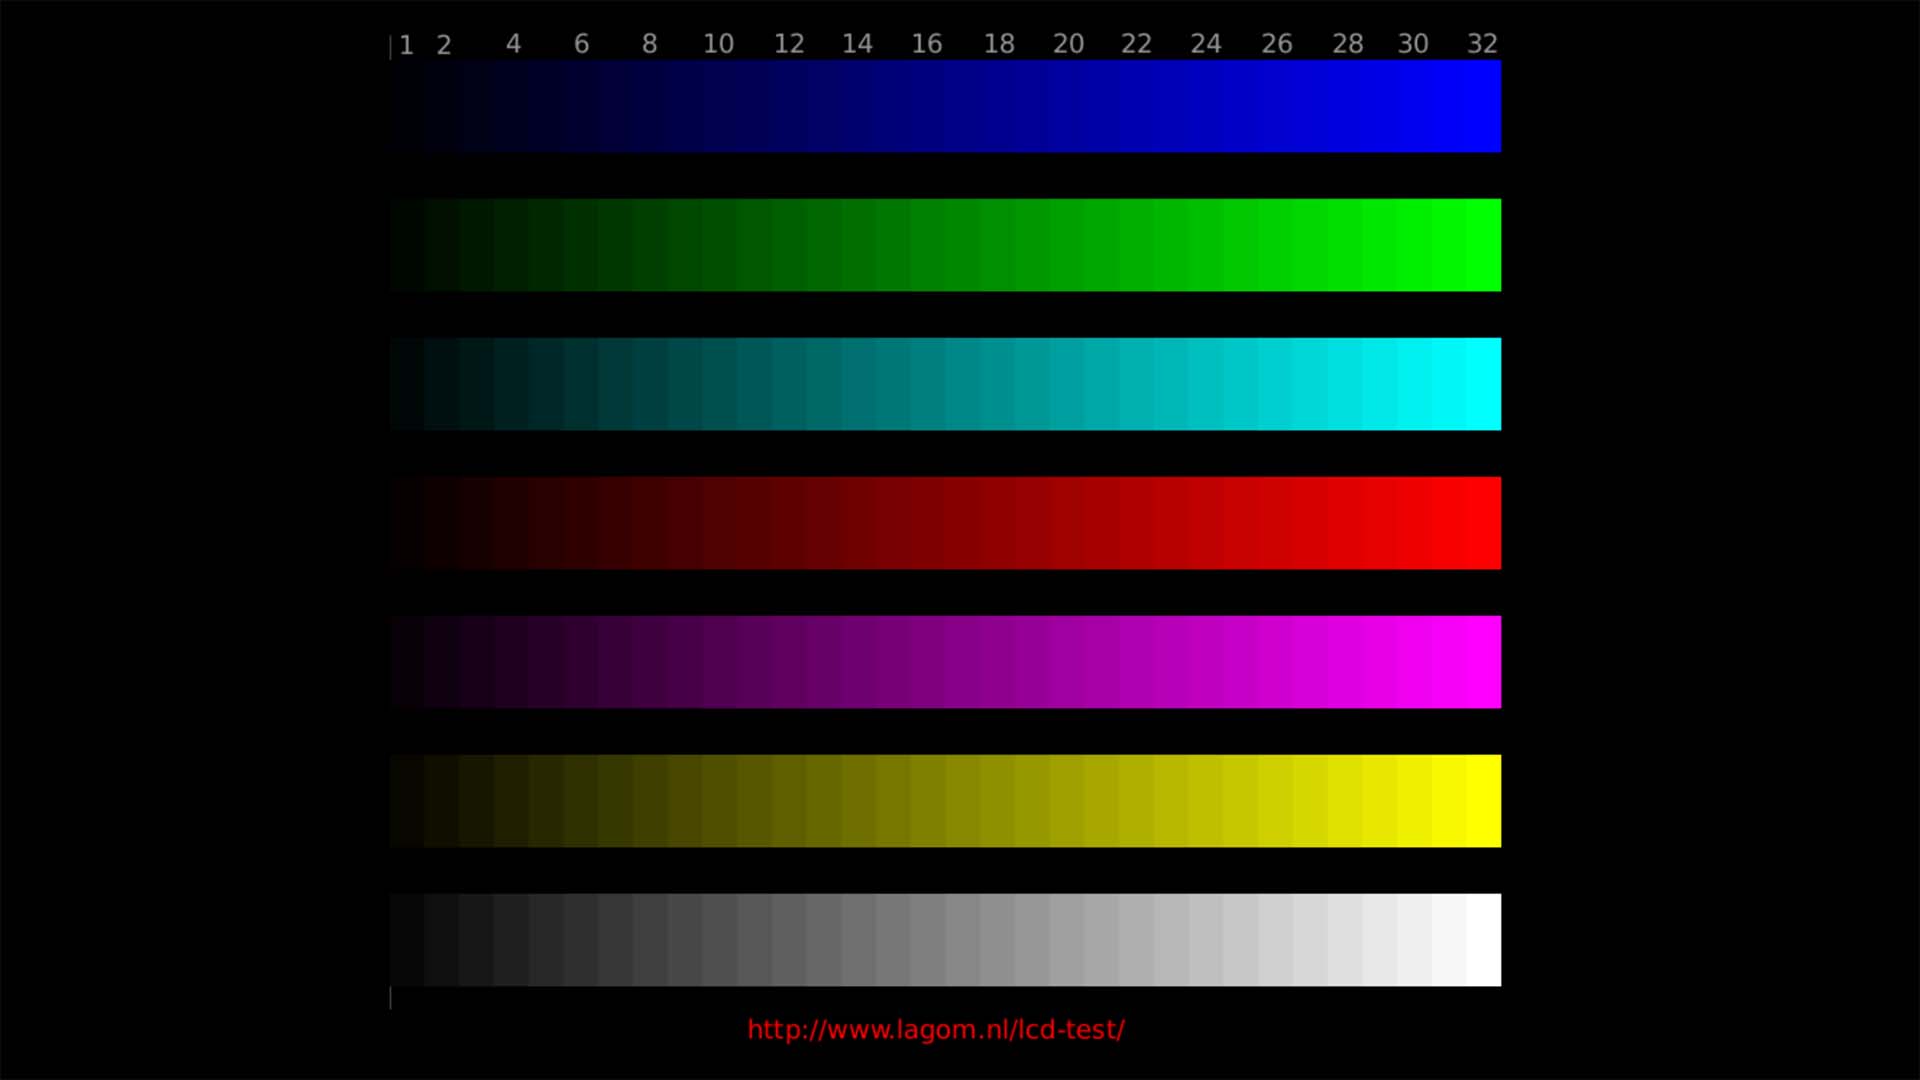 Lagom LCD test screen showing multiple colour bars on a black background